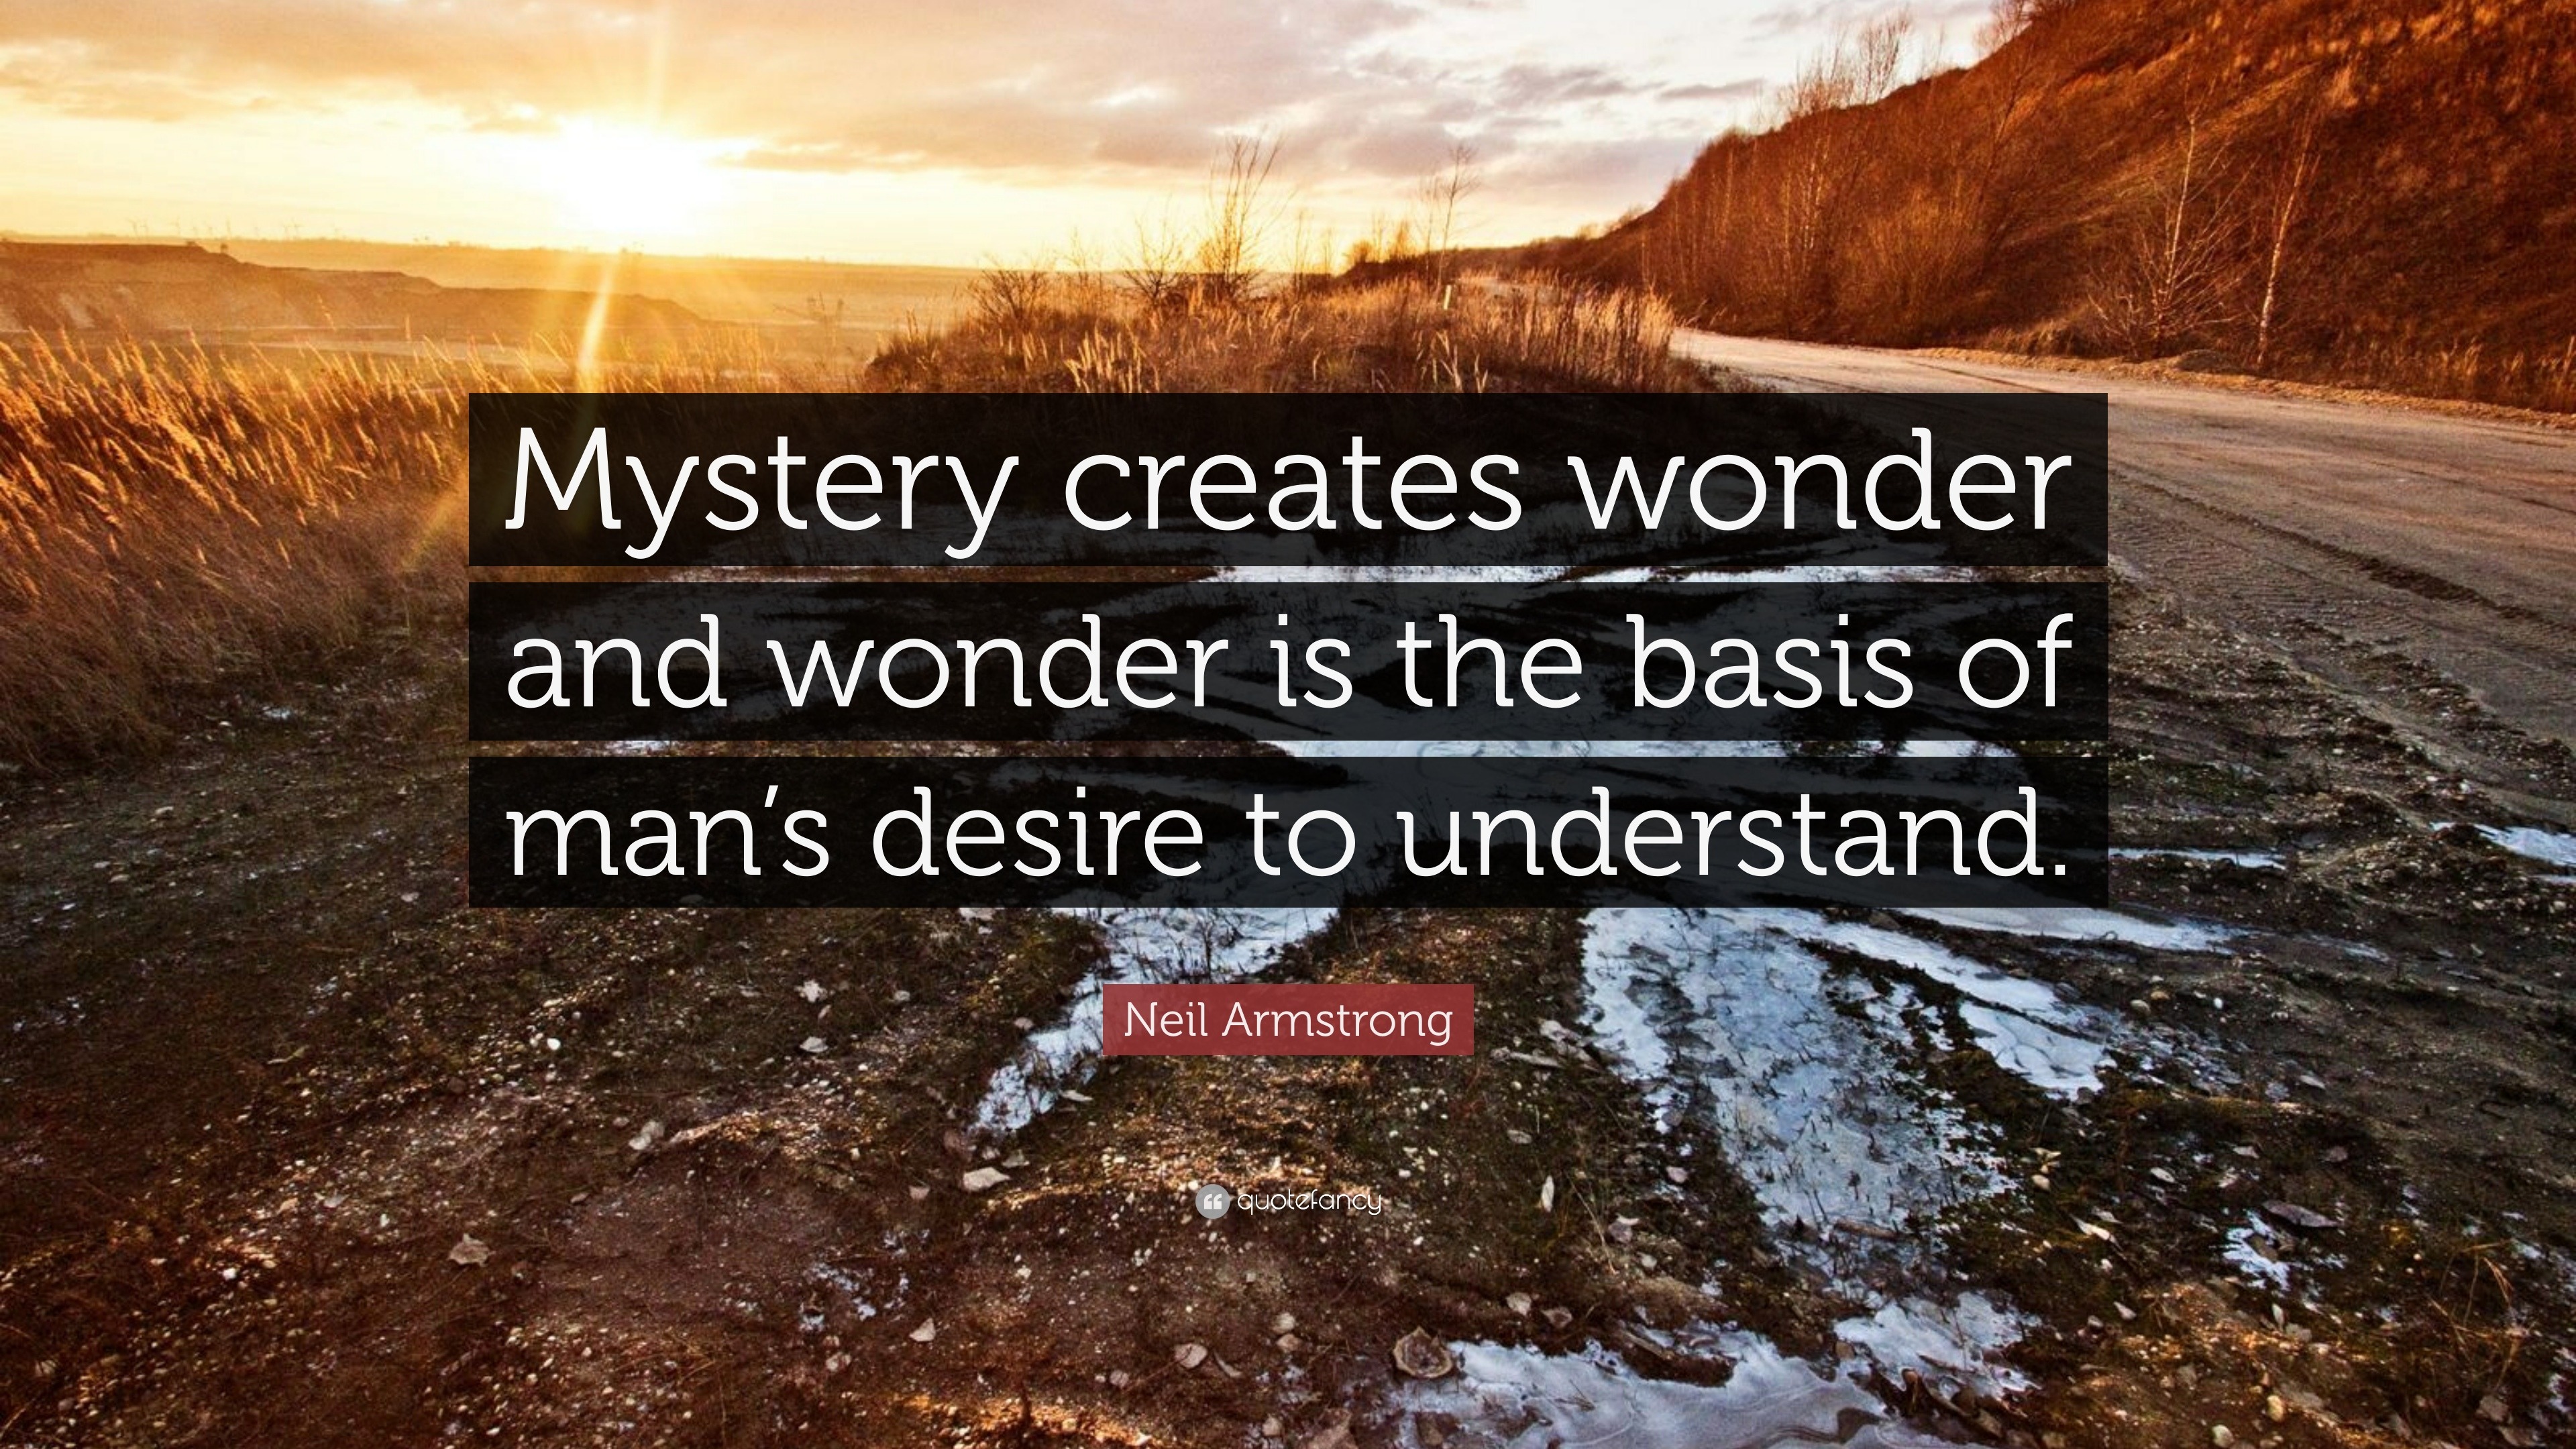 Neil Armstrong Quote: “Mystery creates wonder and wonder is the basis